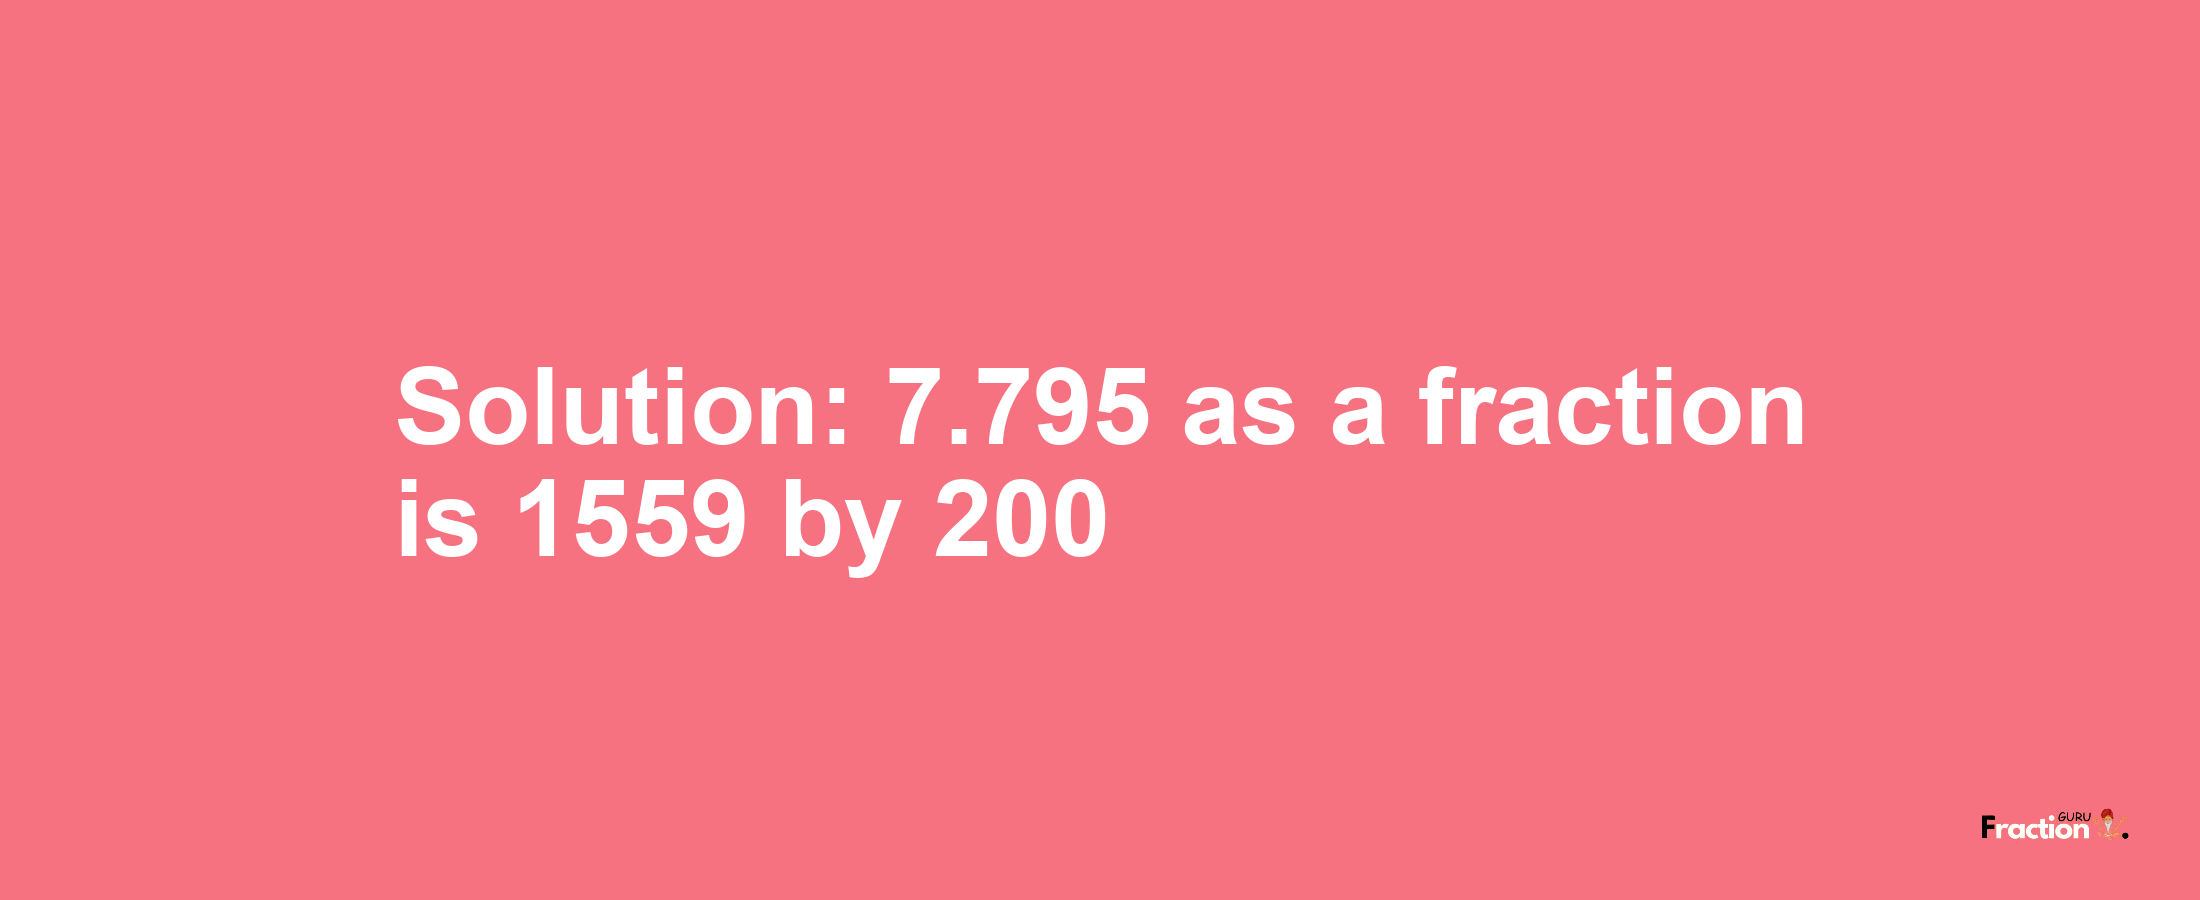 Solution:7.795 as a fraction is 1559/200